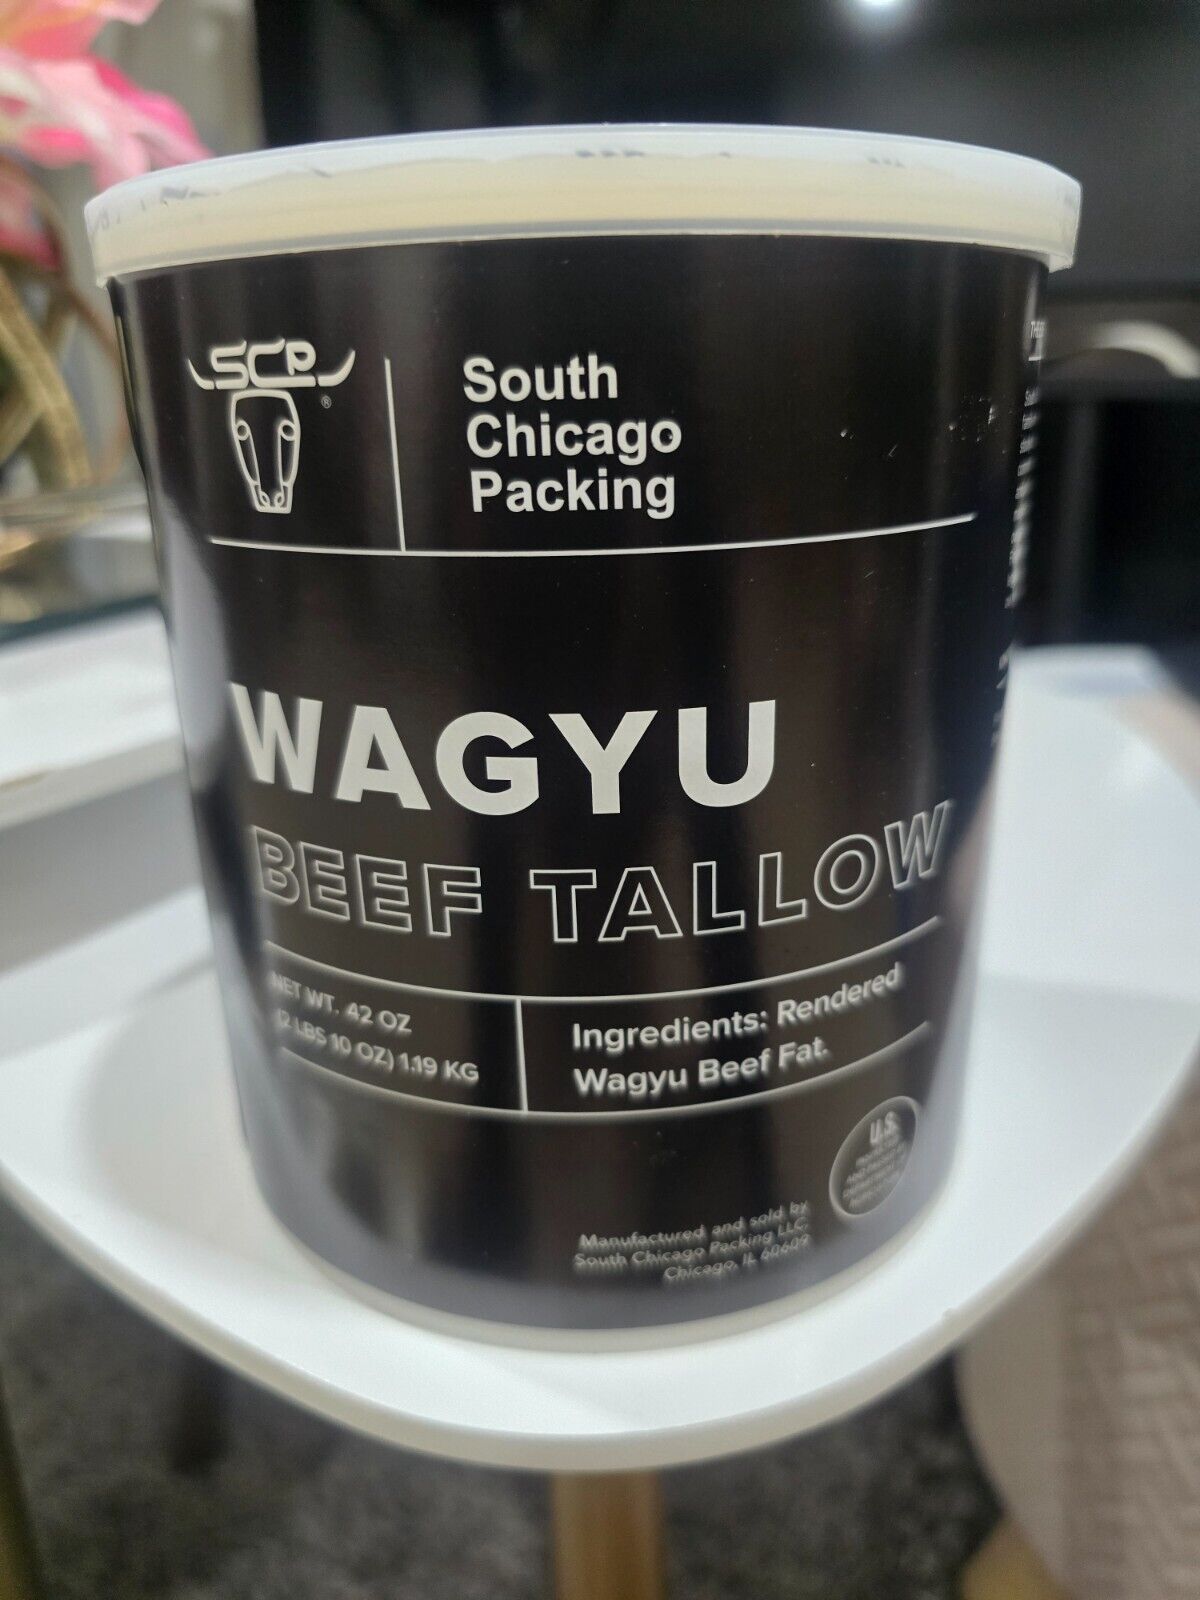 South Chicago Packing Wagyu Beef Tallow, 42oz 2lbs .